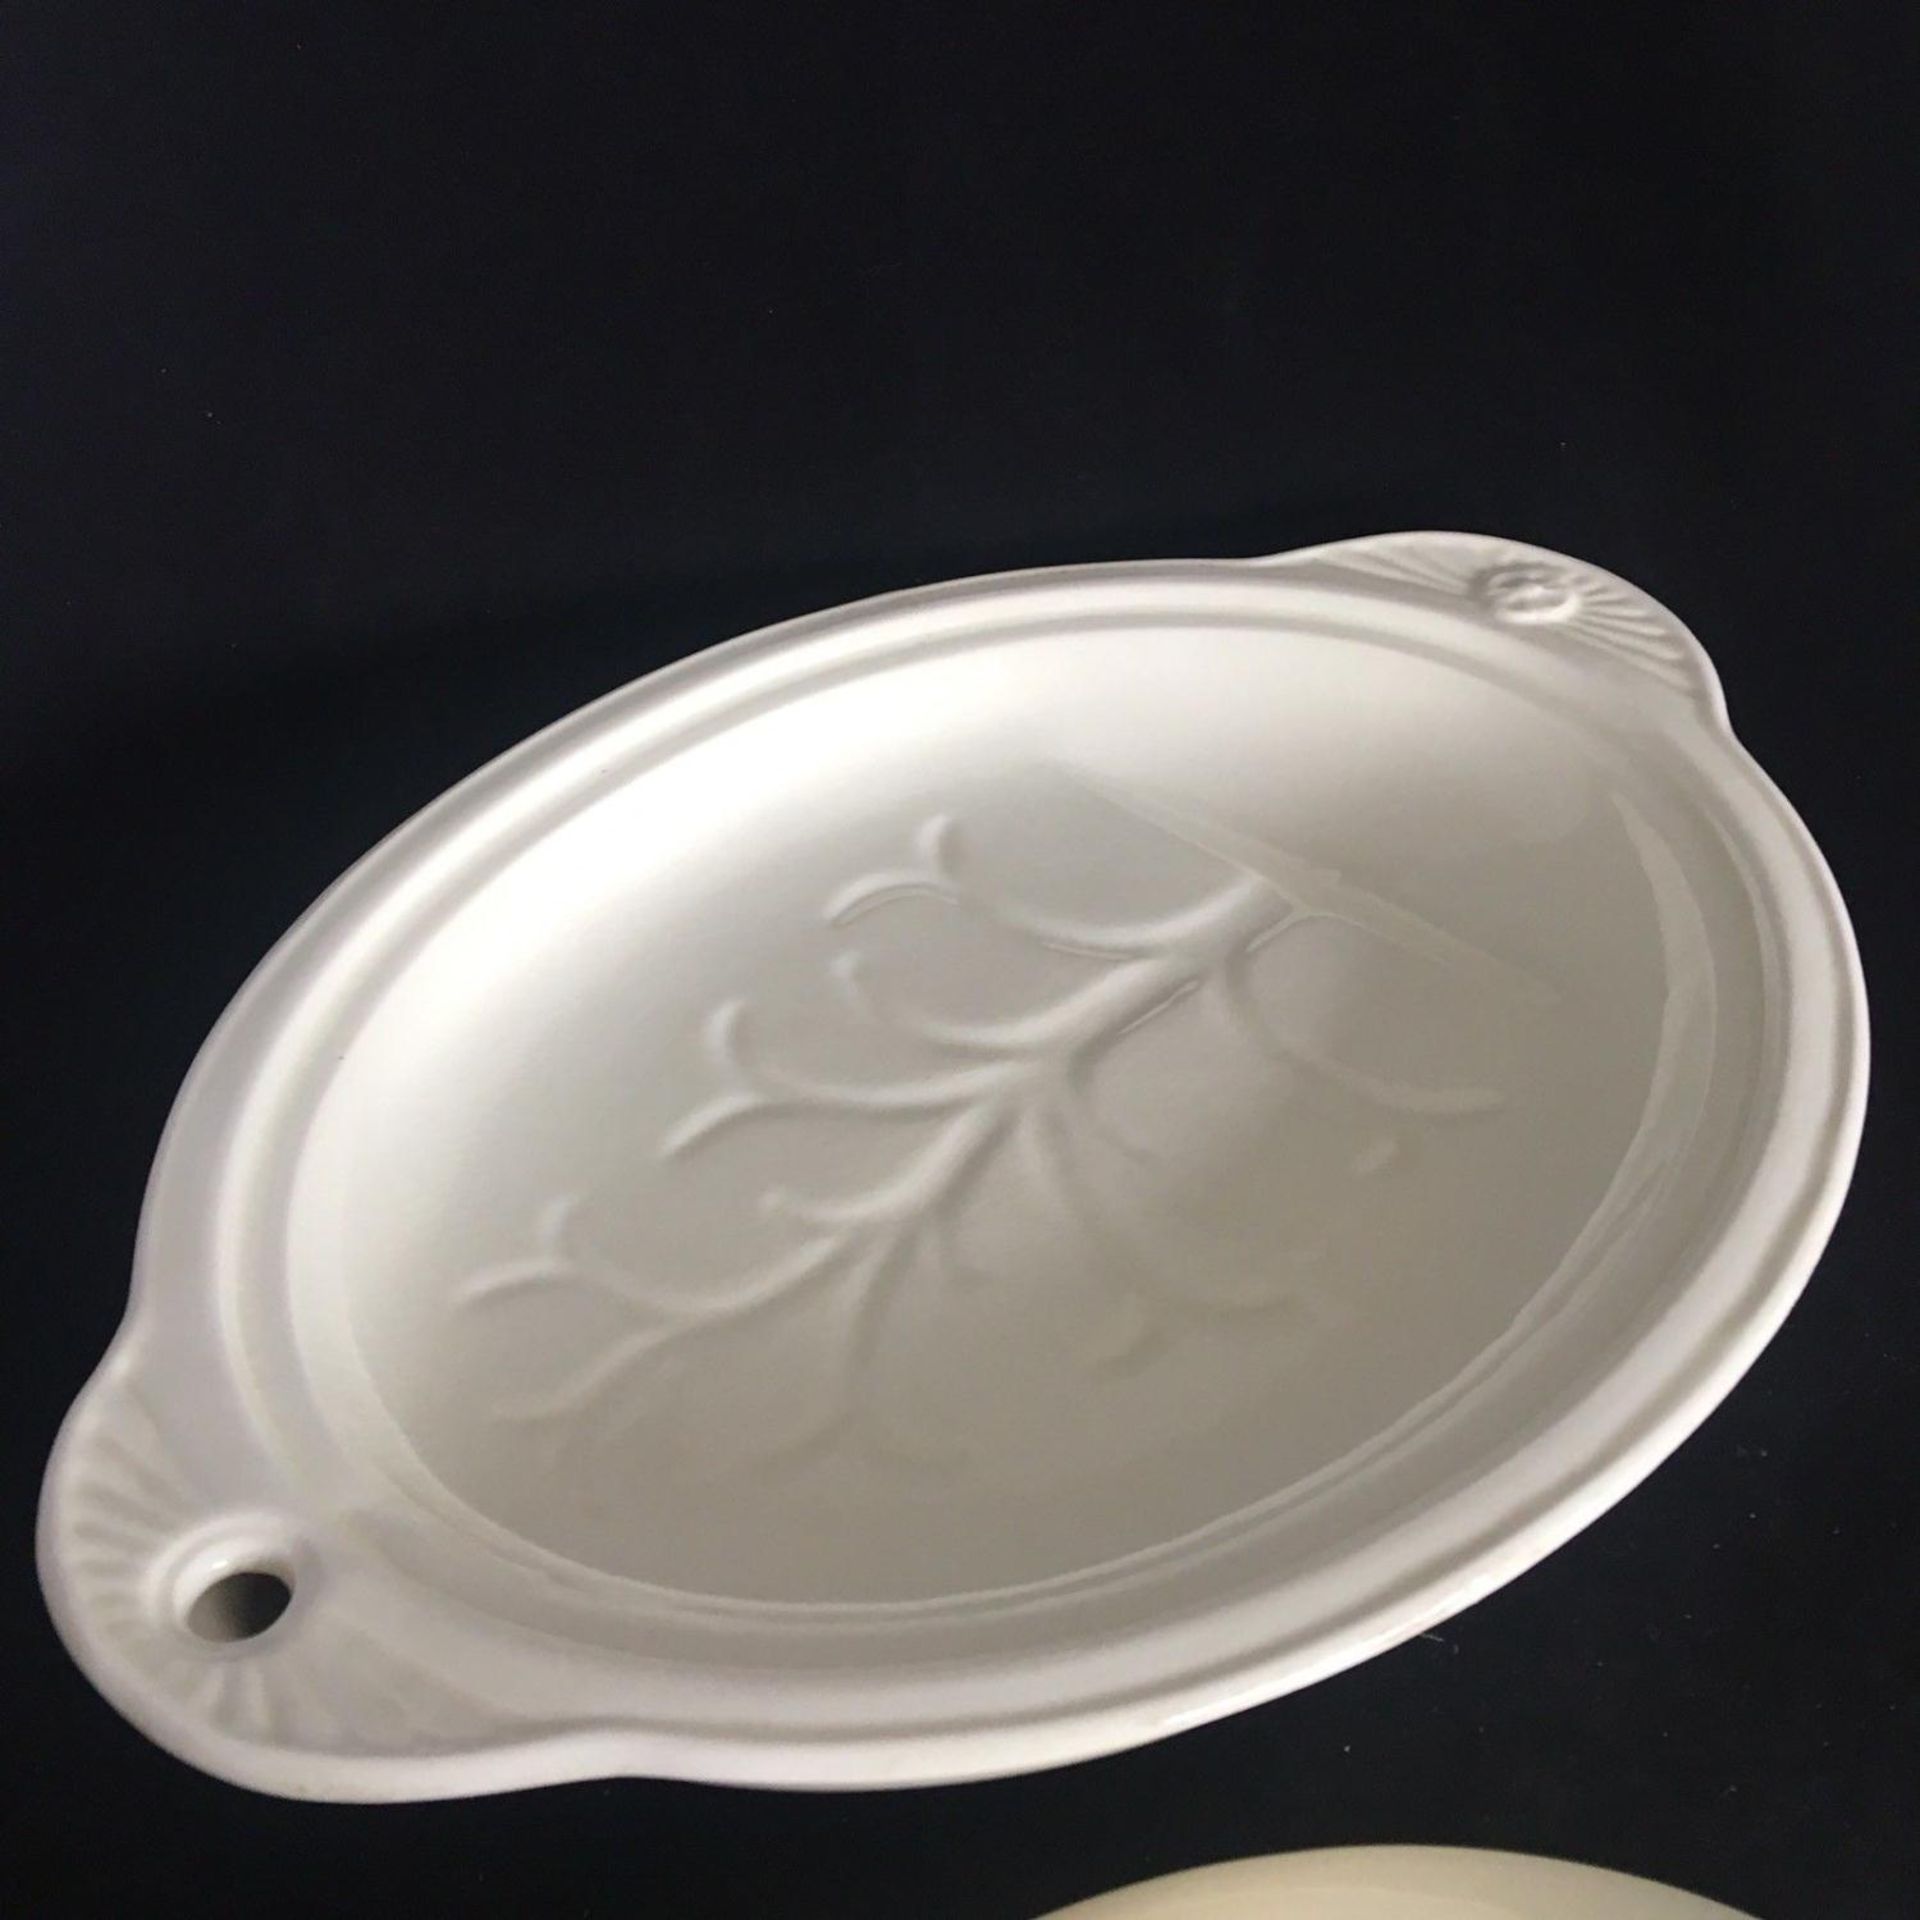 19th Century Wedgwood Cream Warming Dish Plate & Cover Meat Serving Platter - Image 2 of 4